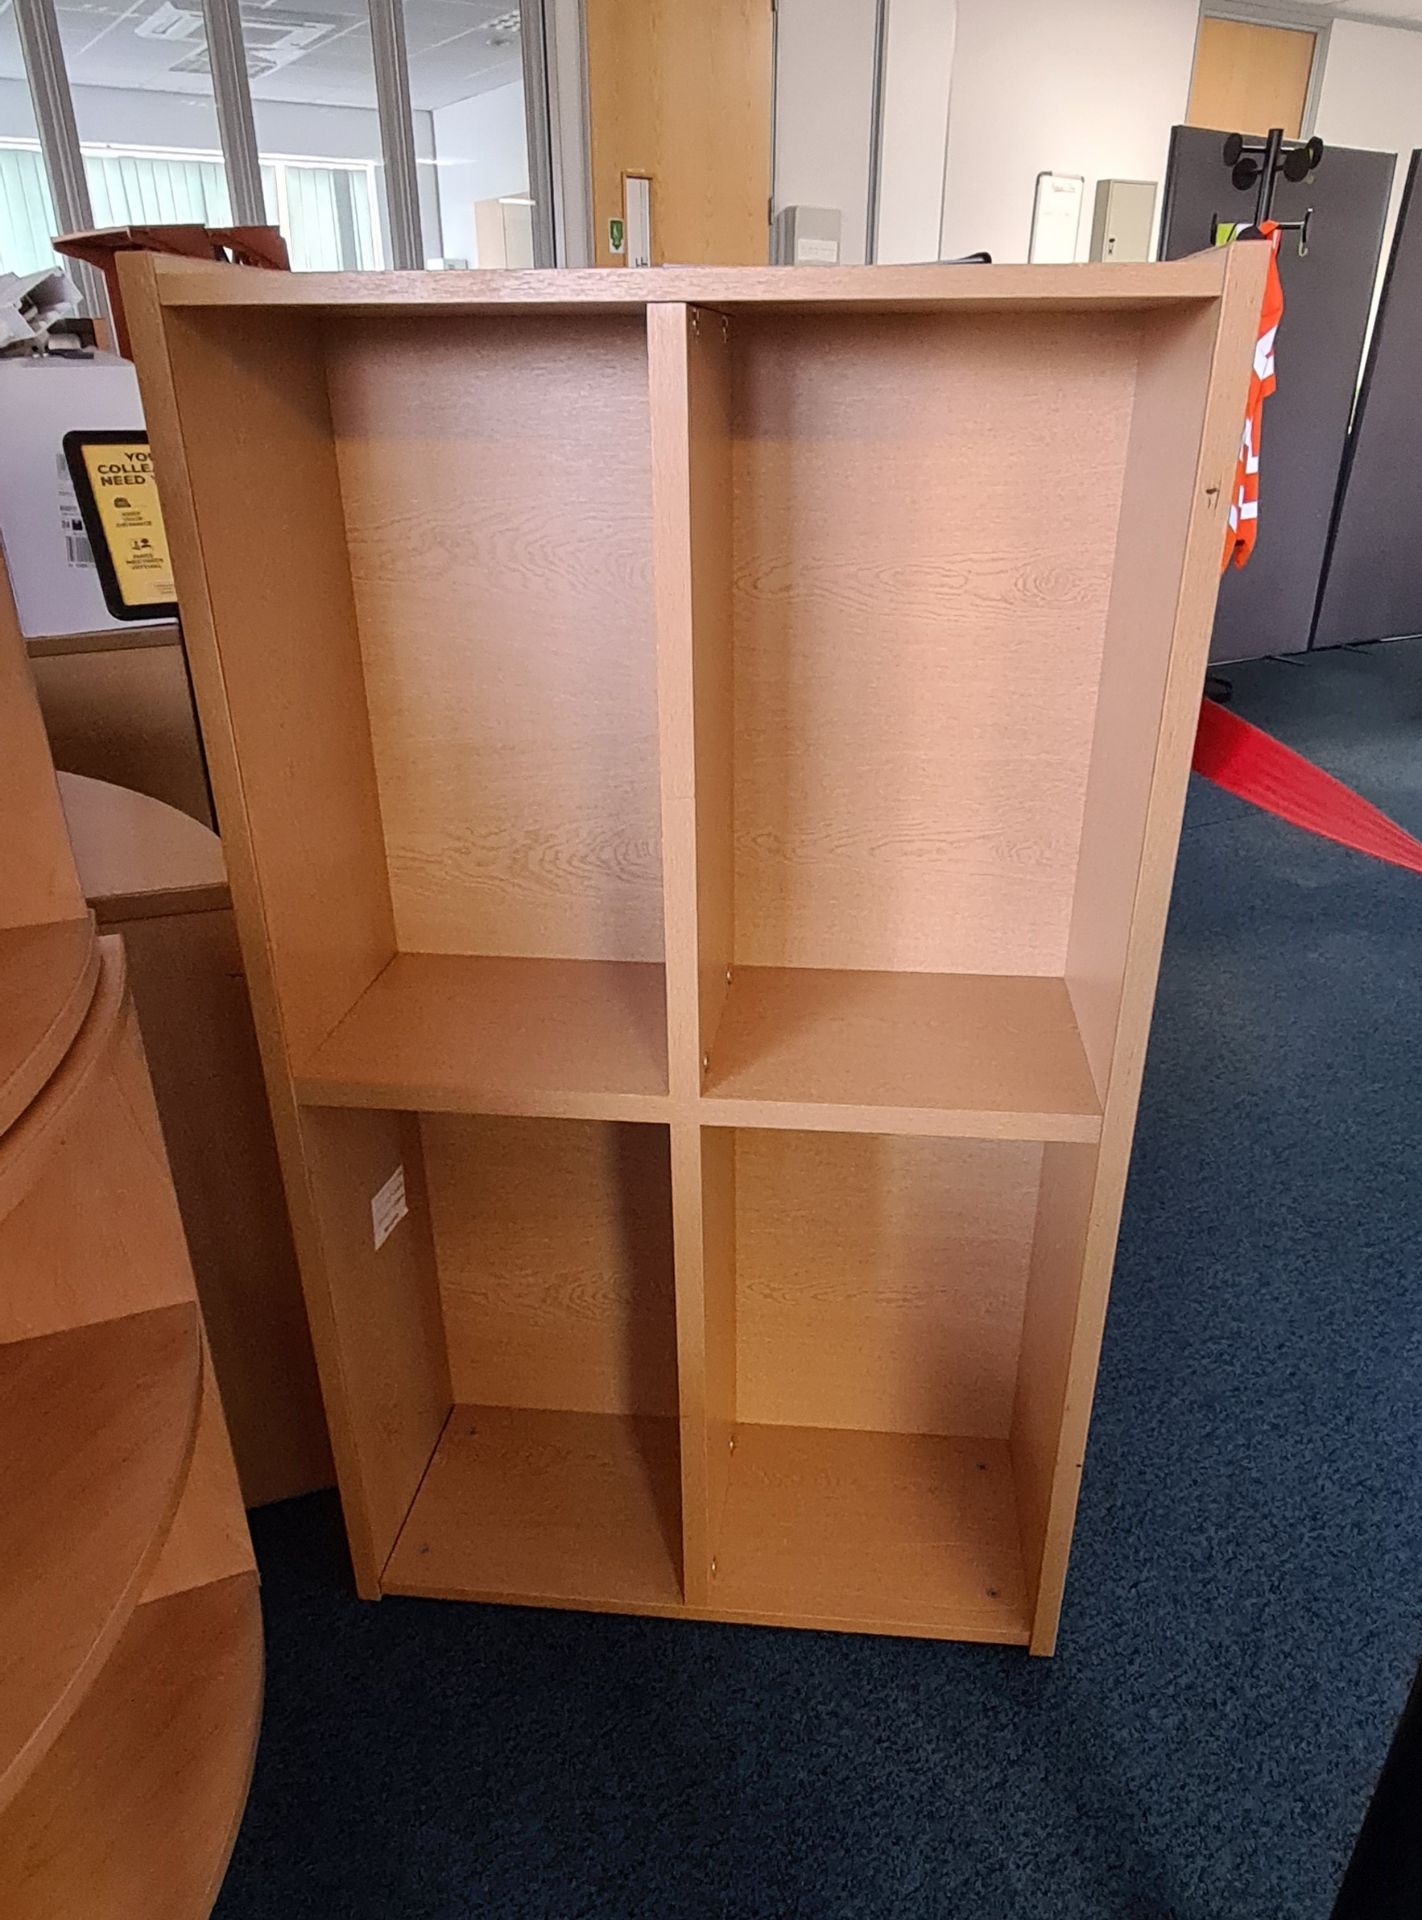 1 x Four Section Office Shelf Unit With a Beech Finish - Ref: 1 x PK004 - Location: Site 2,